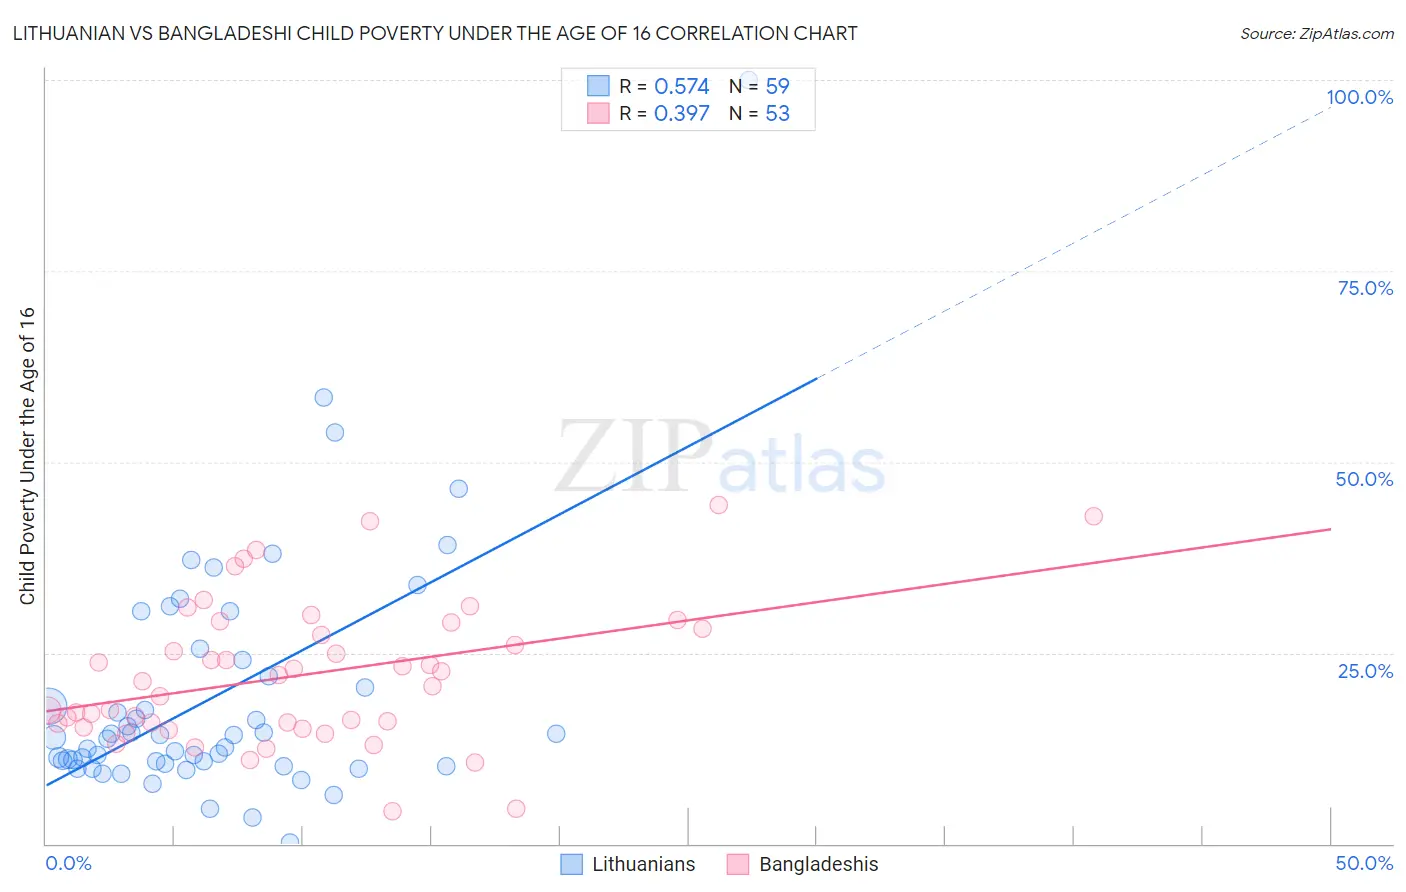 Lithuanian vs Bangladeshi Child Poverty Under the Age of 16